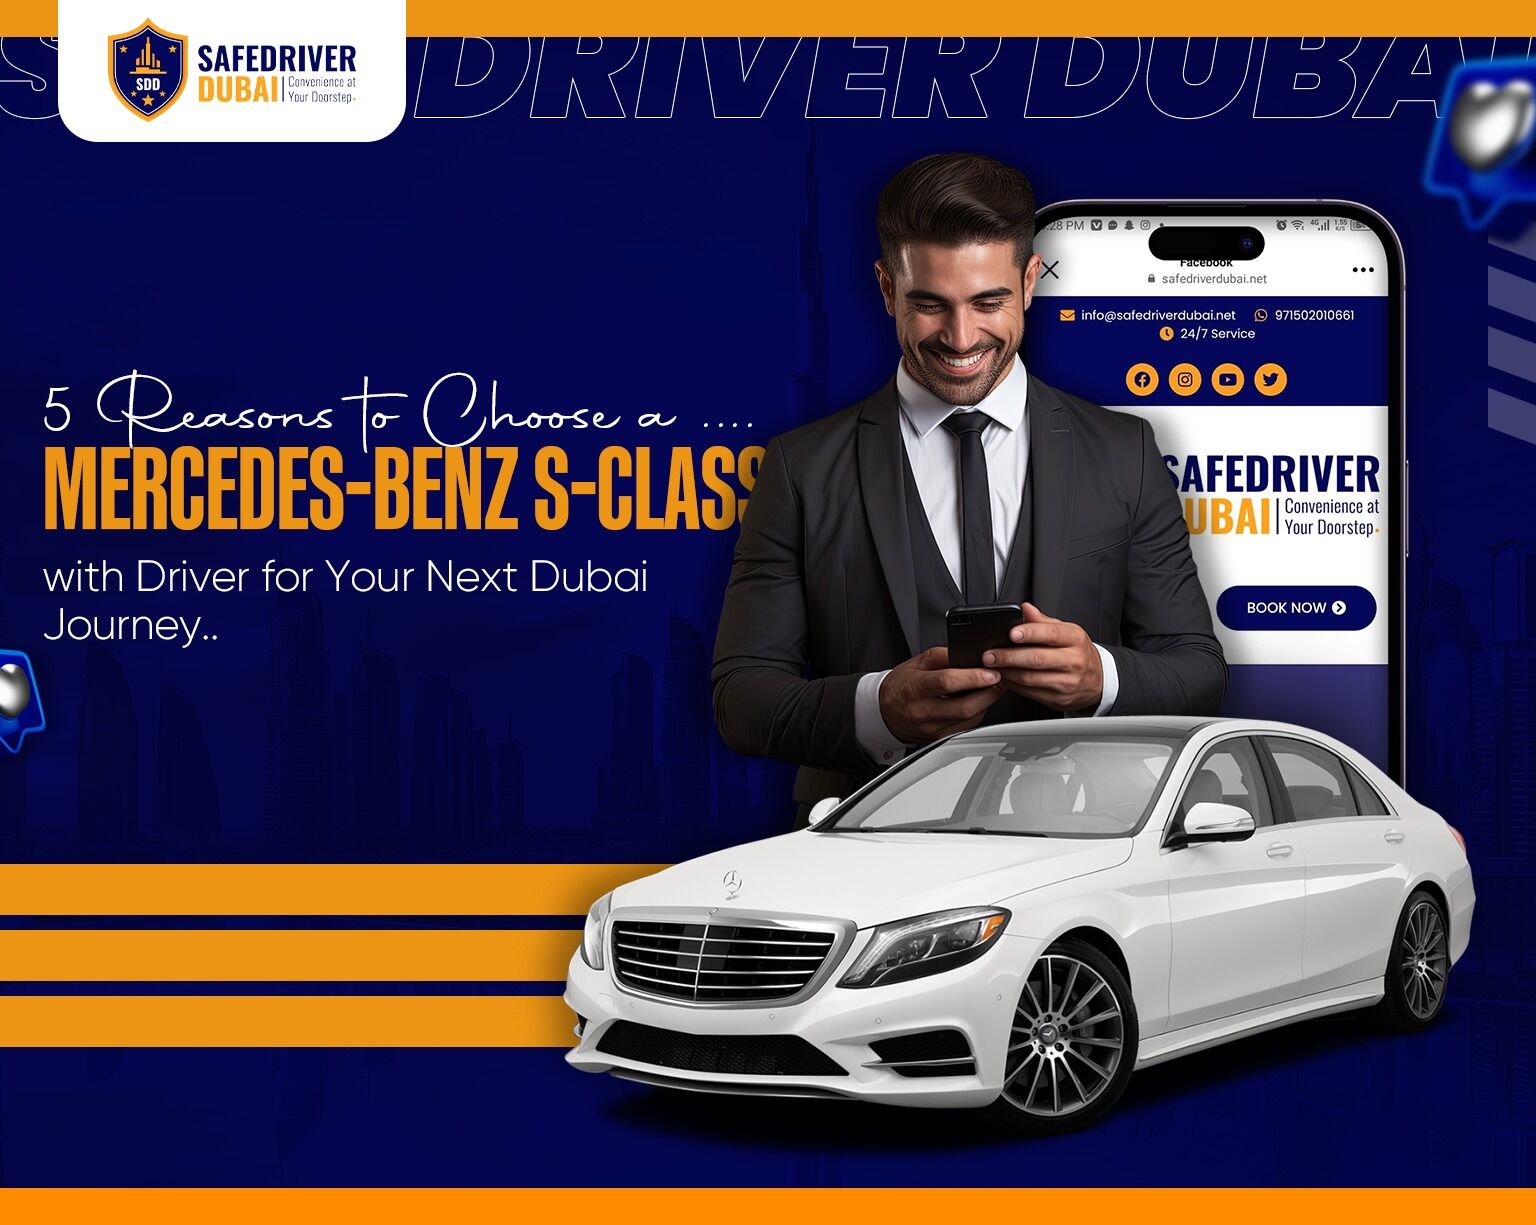 5-Reasons-to-Choose-a-Mercedes-Benz-S-Class-with-Driver-for-Your-Next-Dubai-Journey